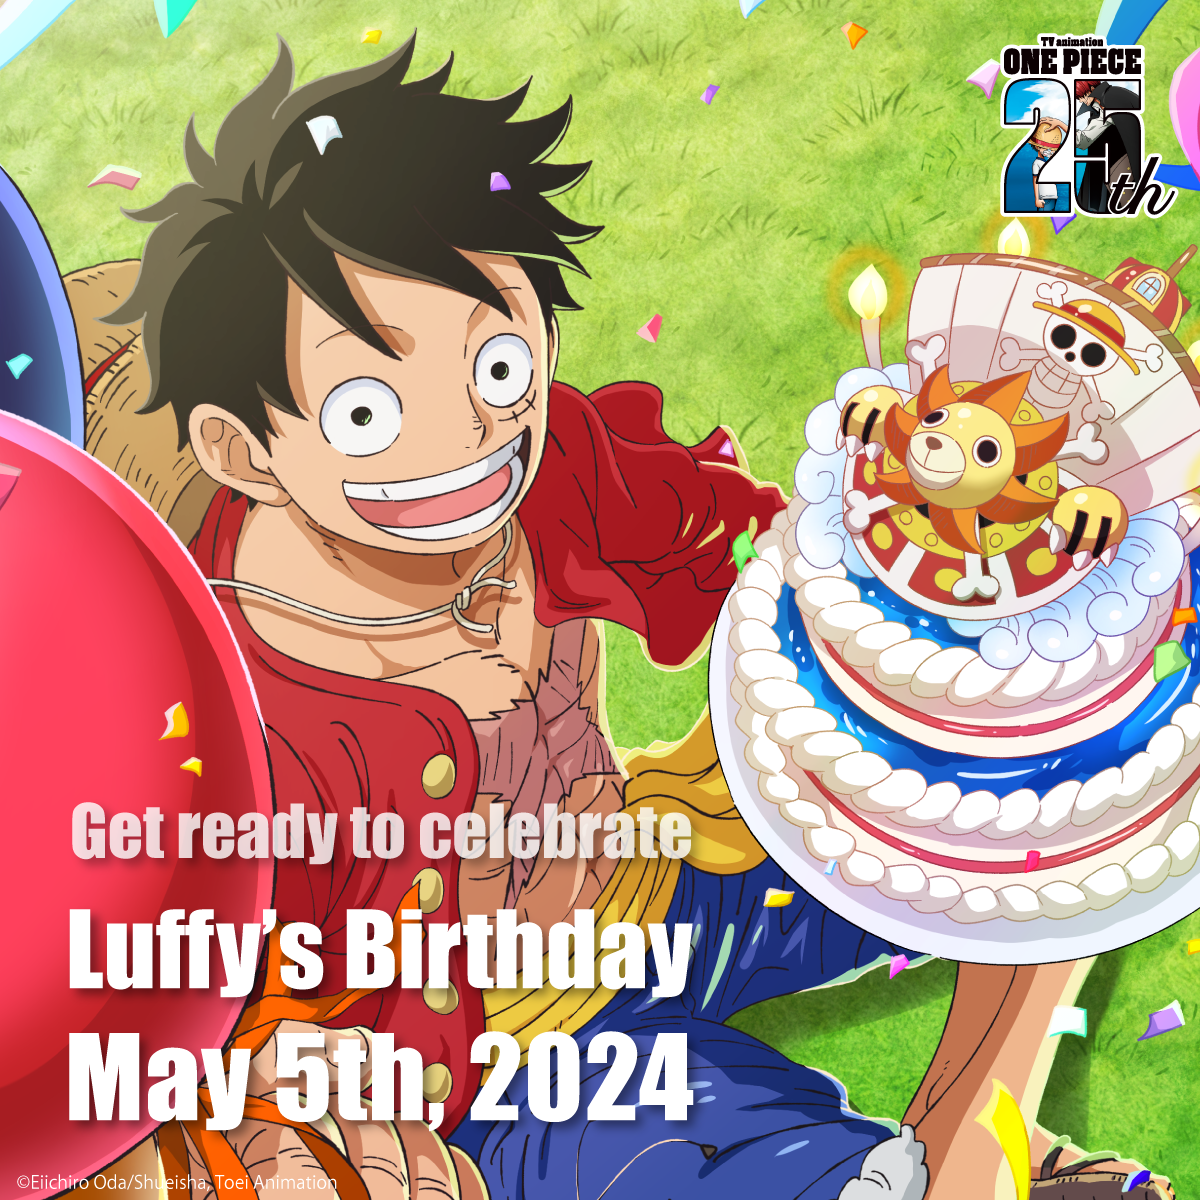 One Piece's Luffy birthday key official visual by Toei Animation